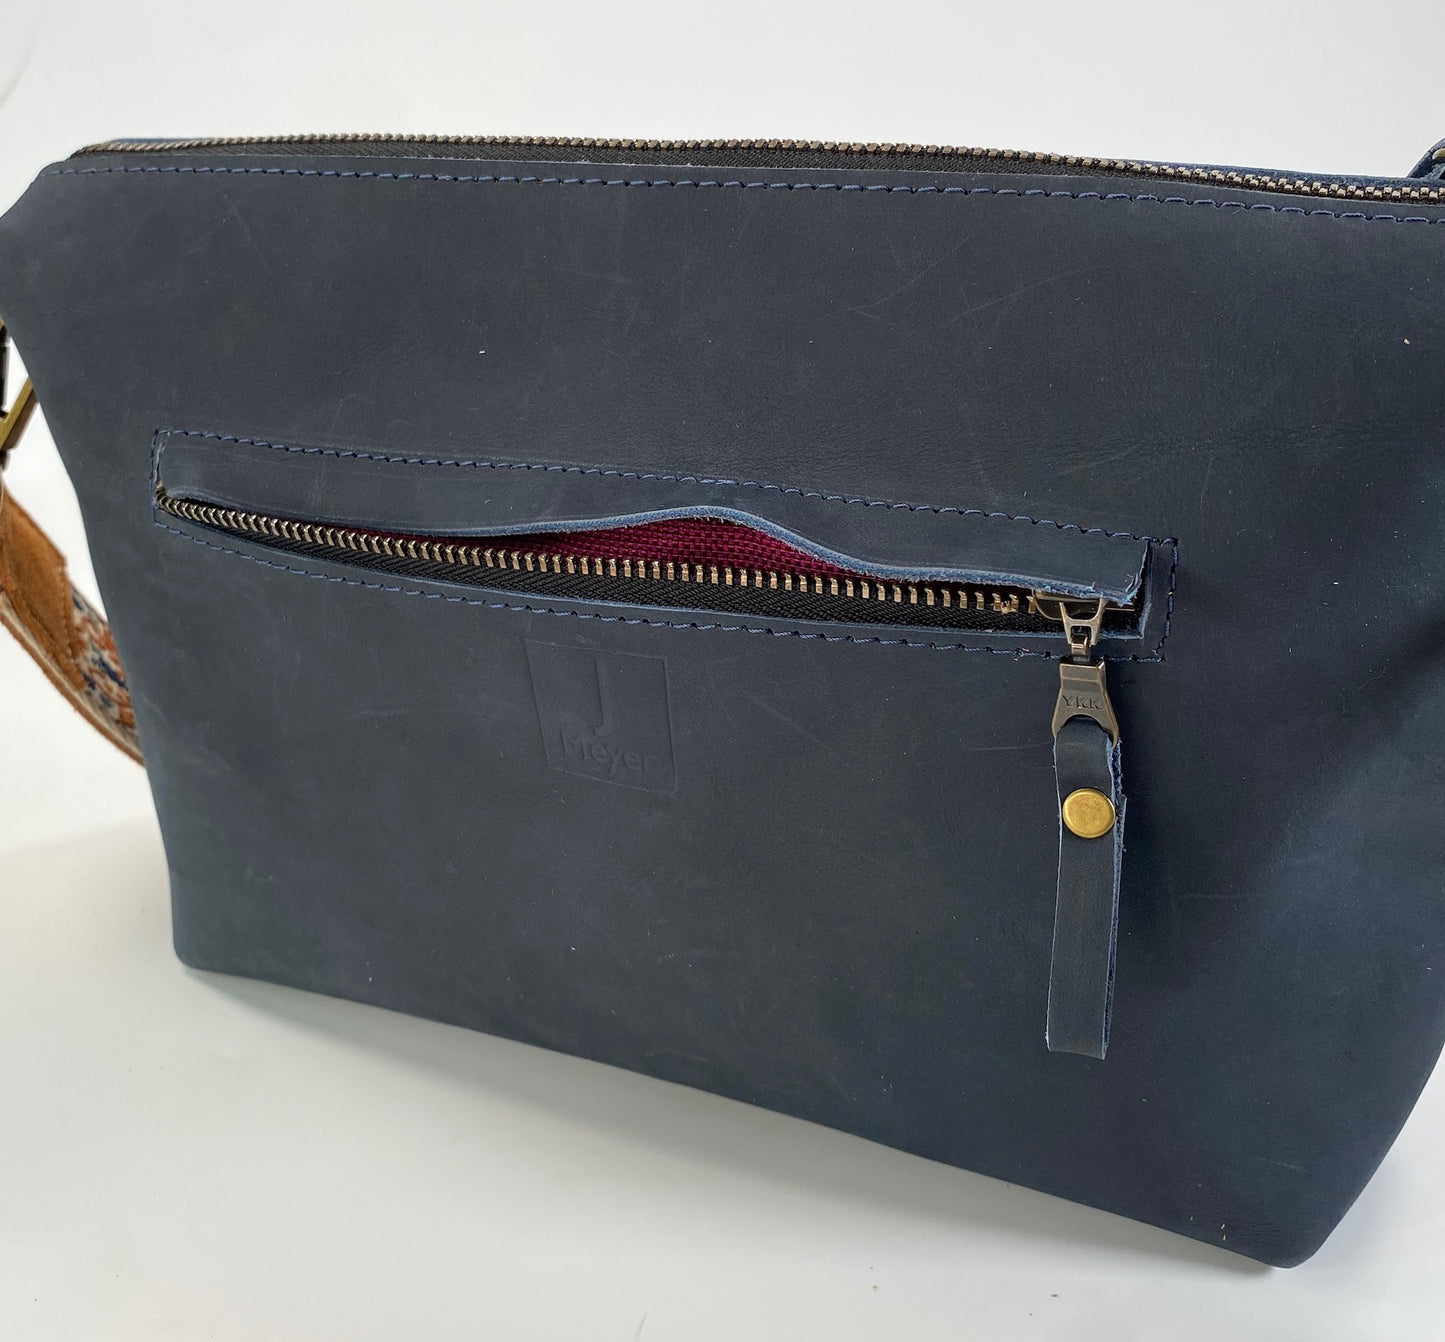 Moody Blue Leather Crossbody Purse with Coordinating Strap